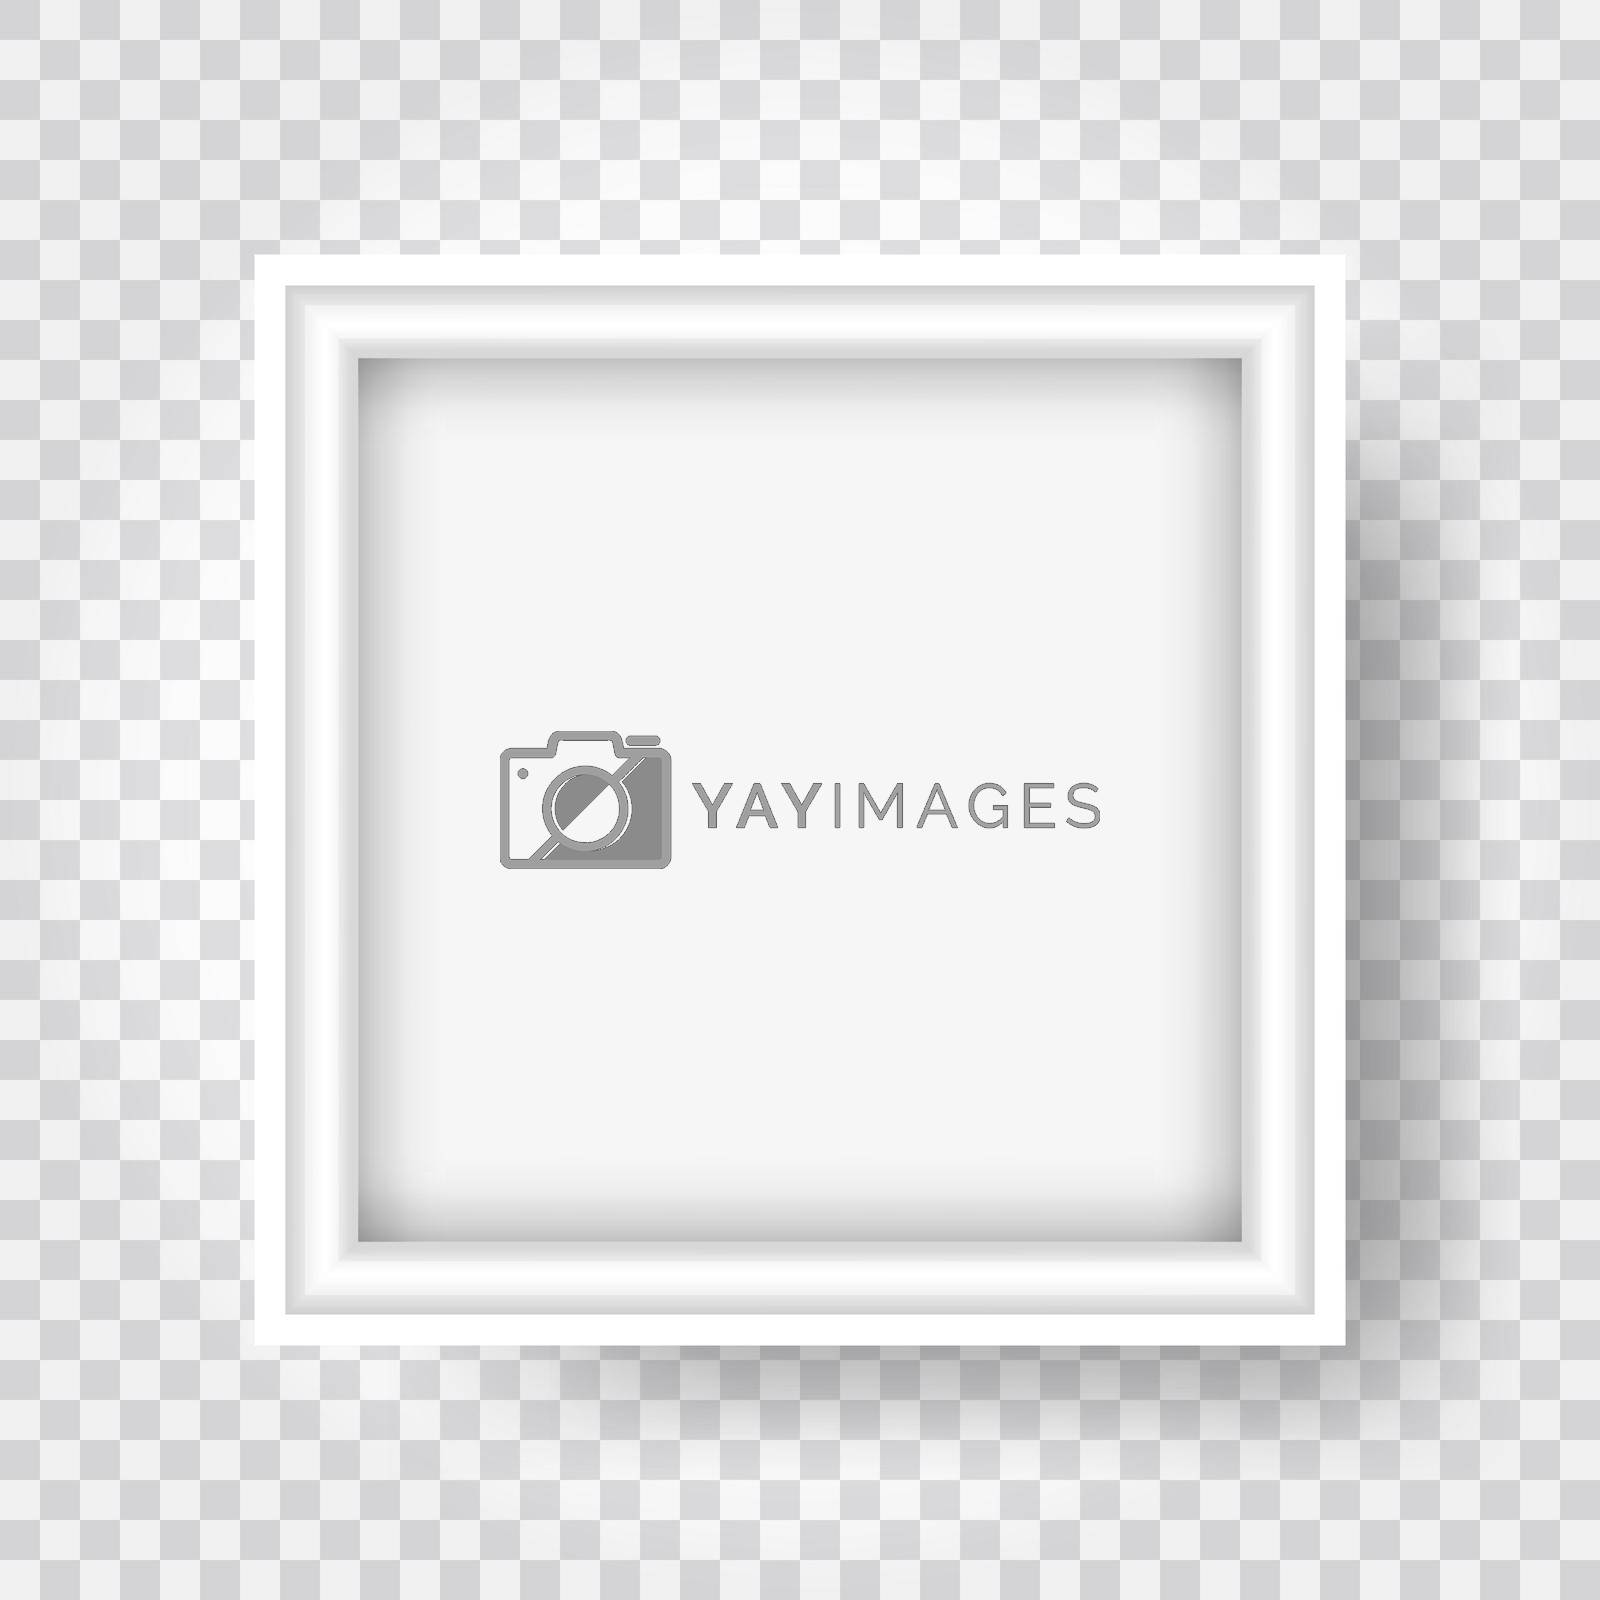 Royalty free image of Blank Image frame template by GALA_art